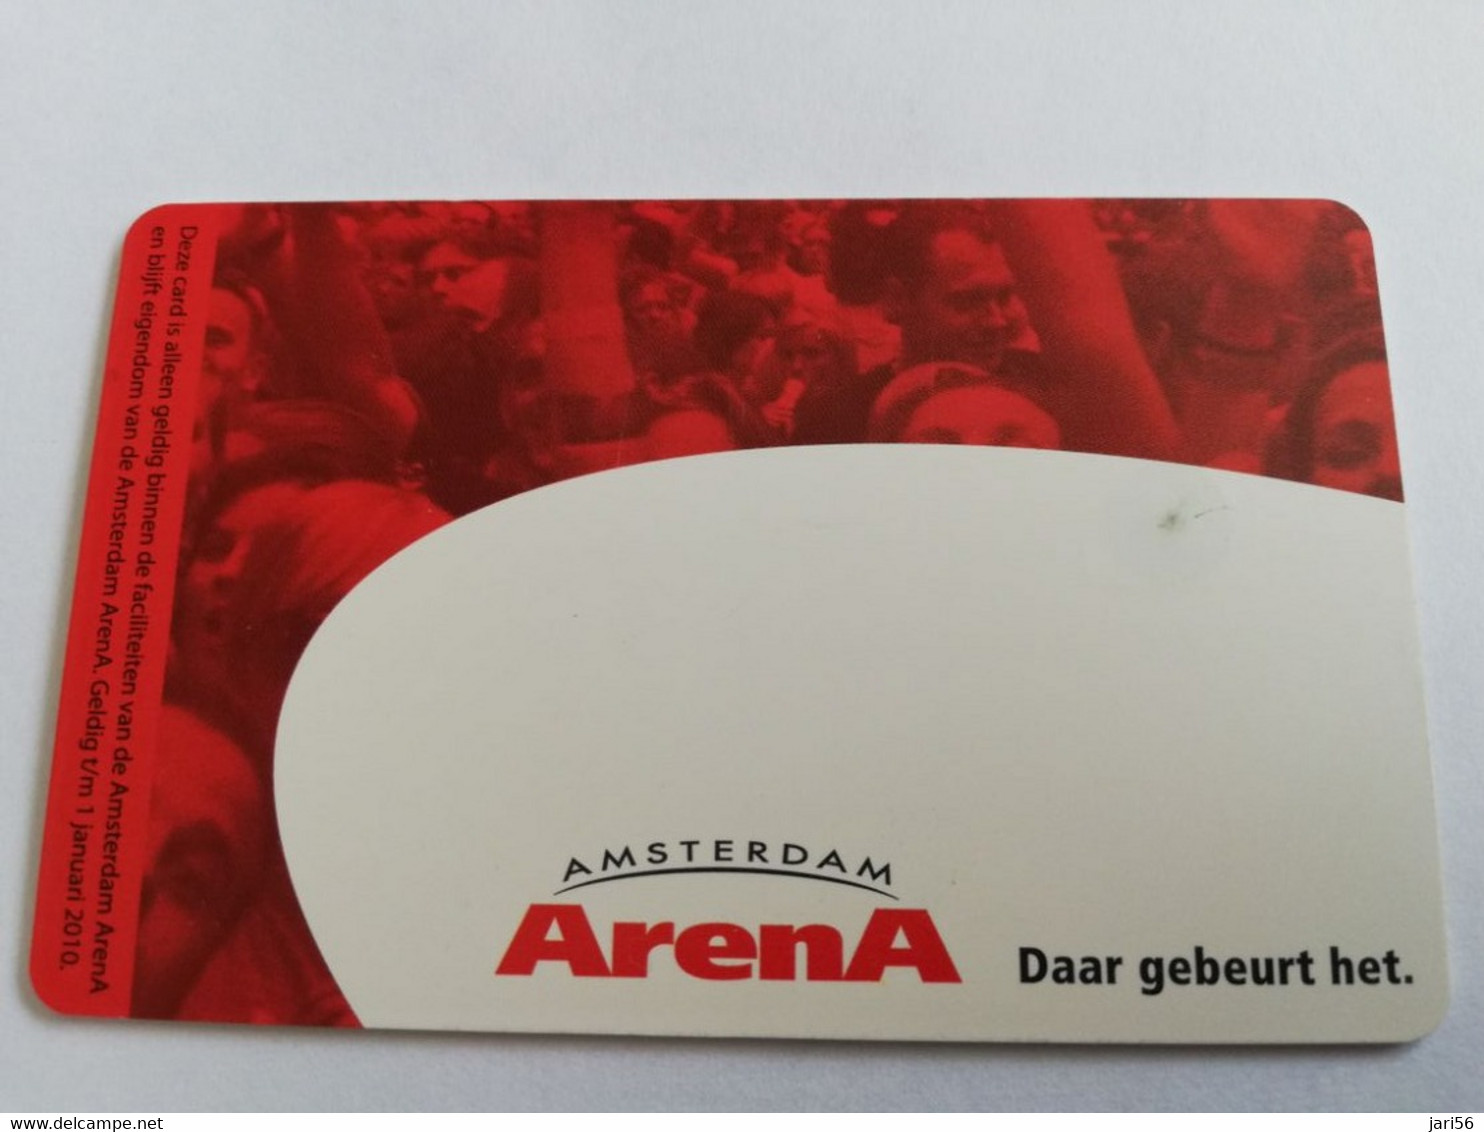 NETHERLANDS CHIPCARD €10,- ARENA CARD / BON JOVI /THE LOST HIGHWAY LEADS TO AMSTERDAM   /MUSIC   - USED CARD  ** 9455** - Publiques